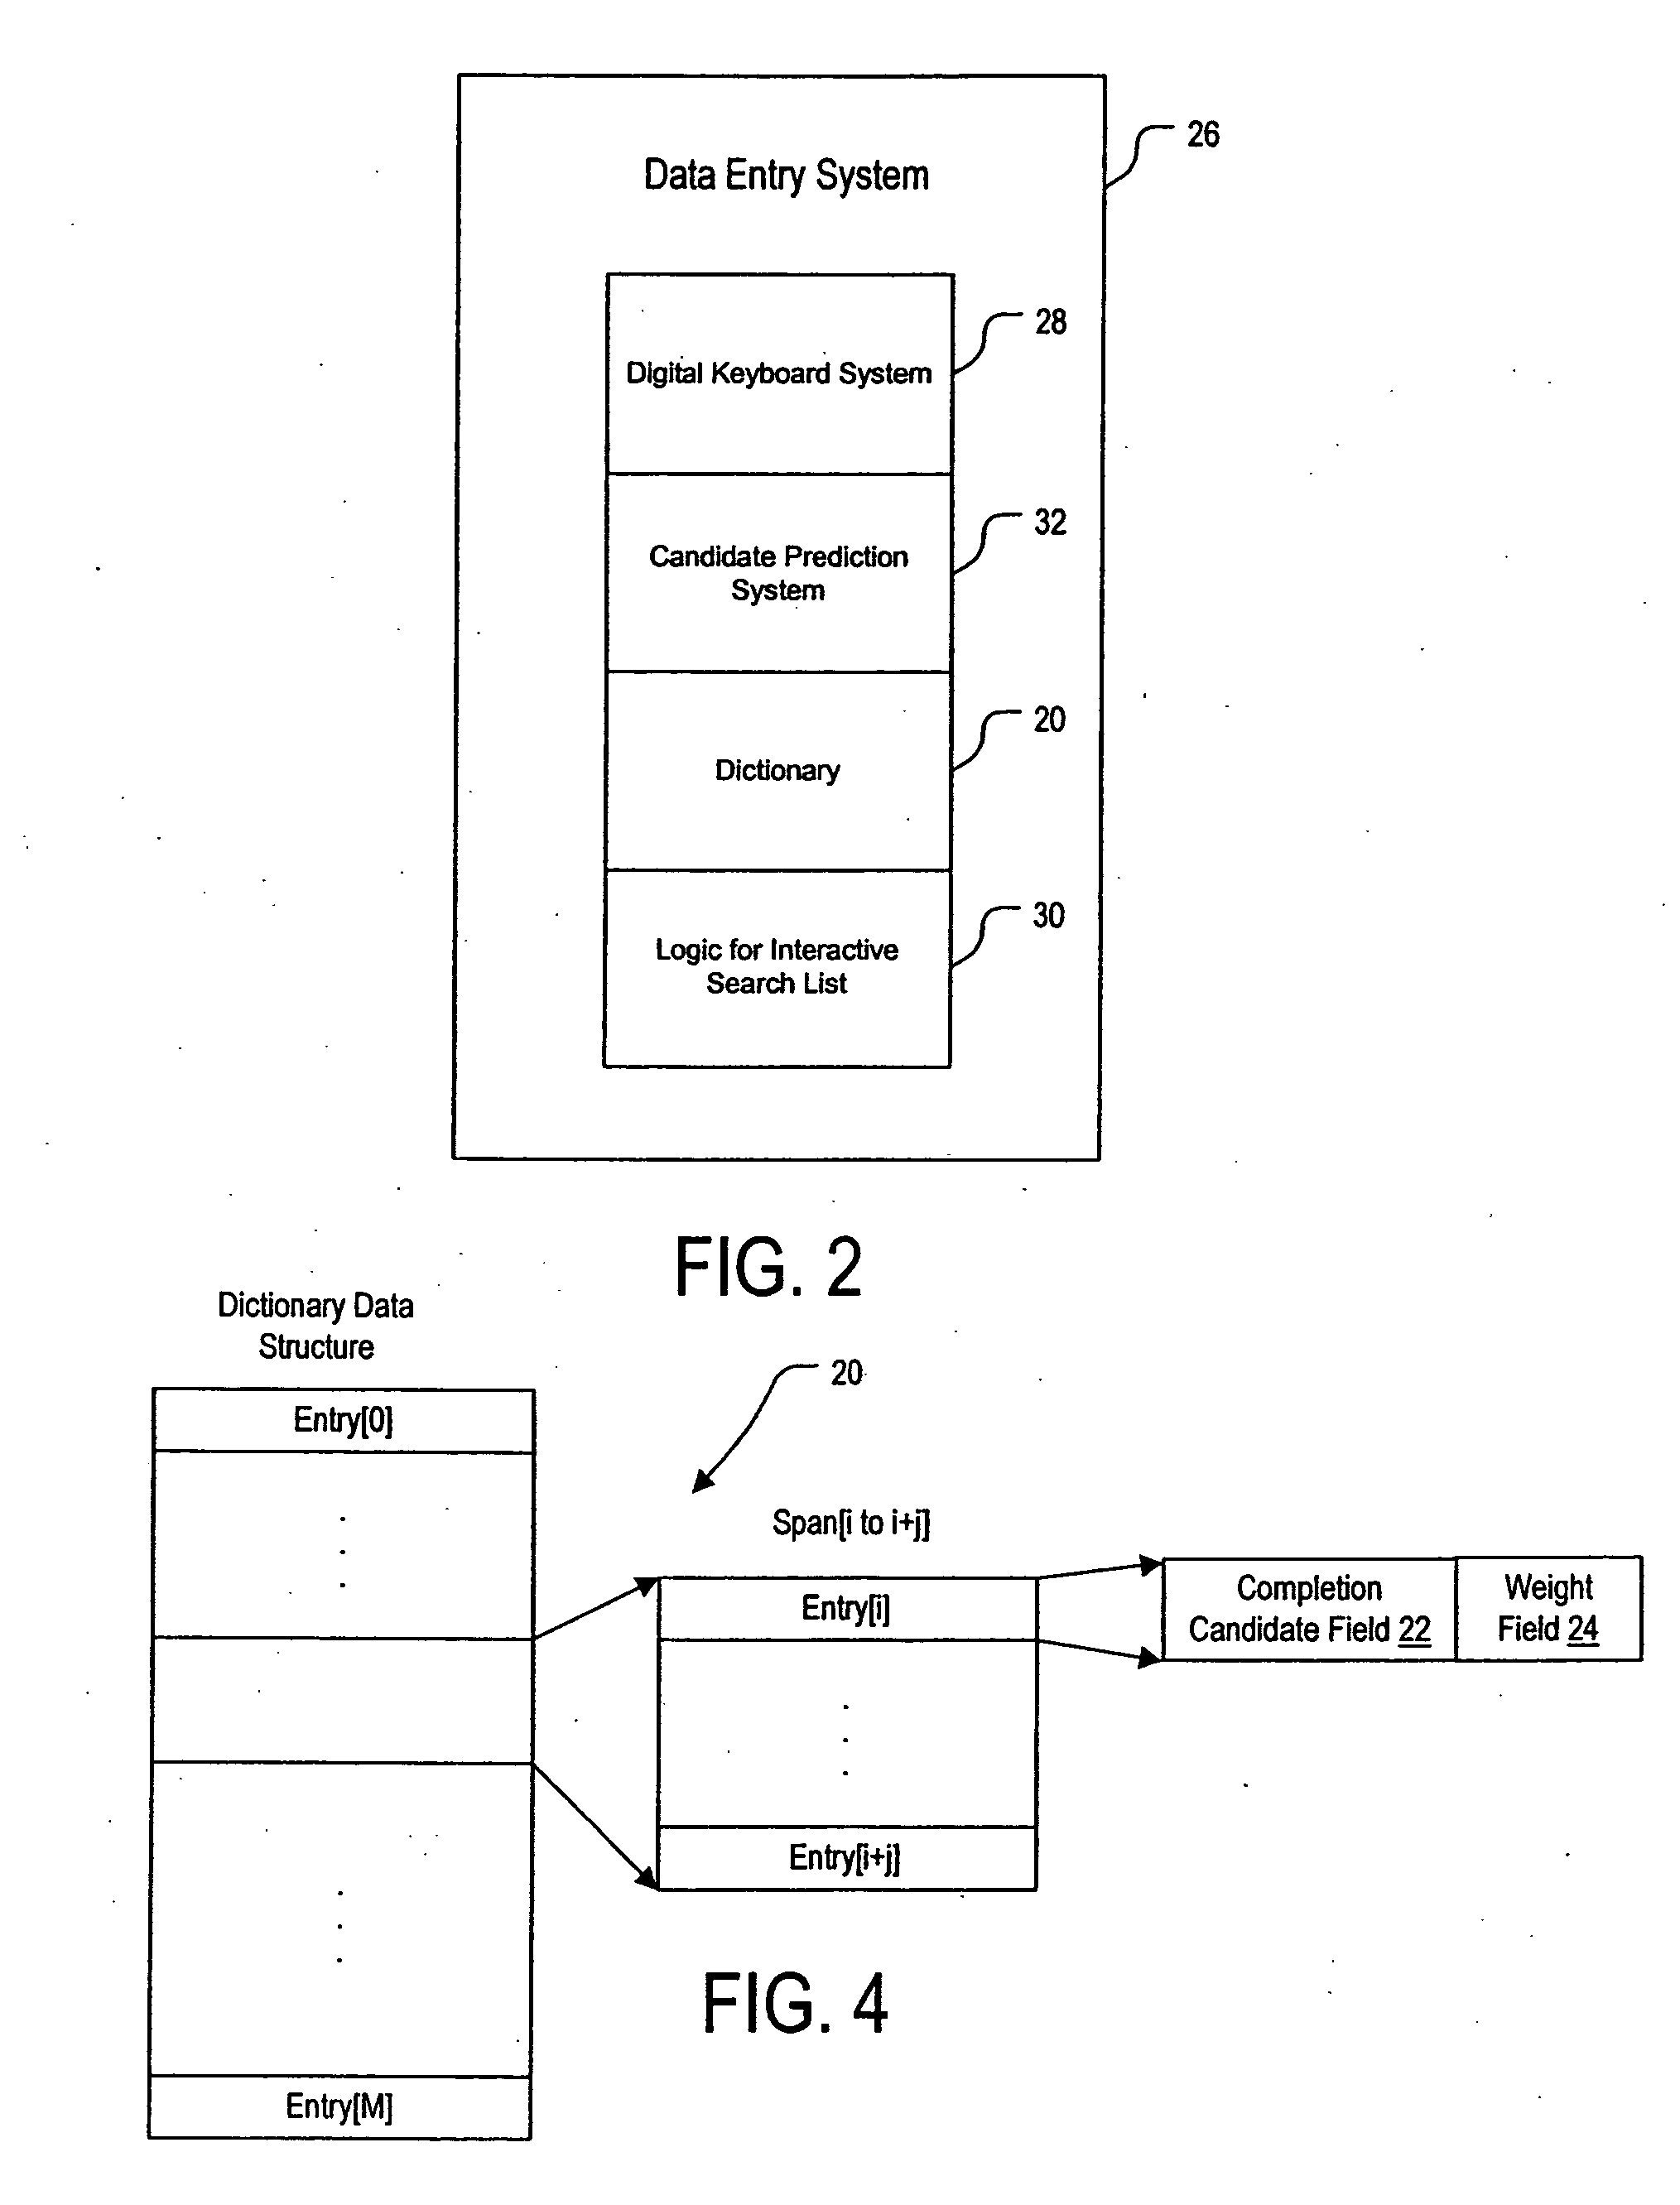 Data entry for personal computing devices